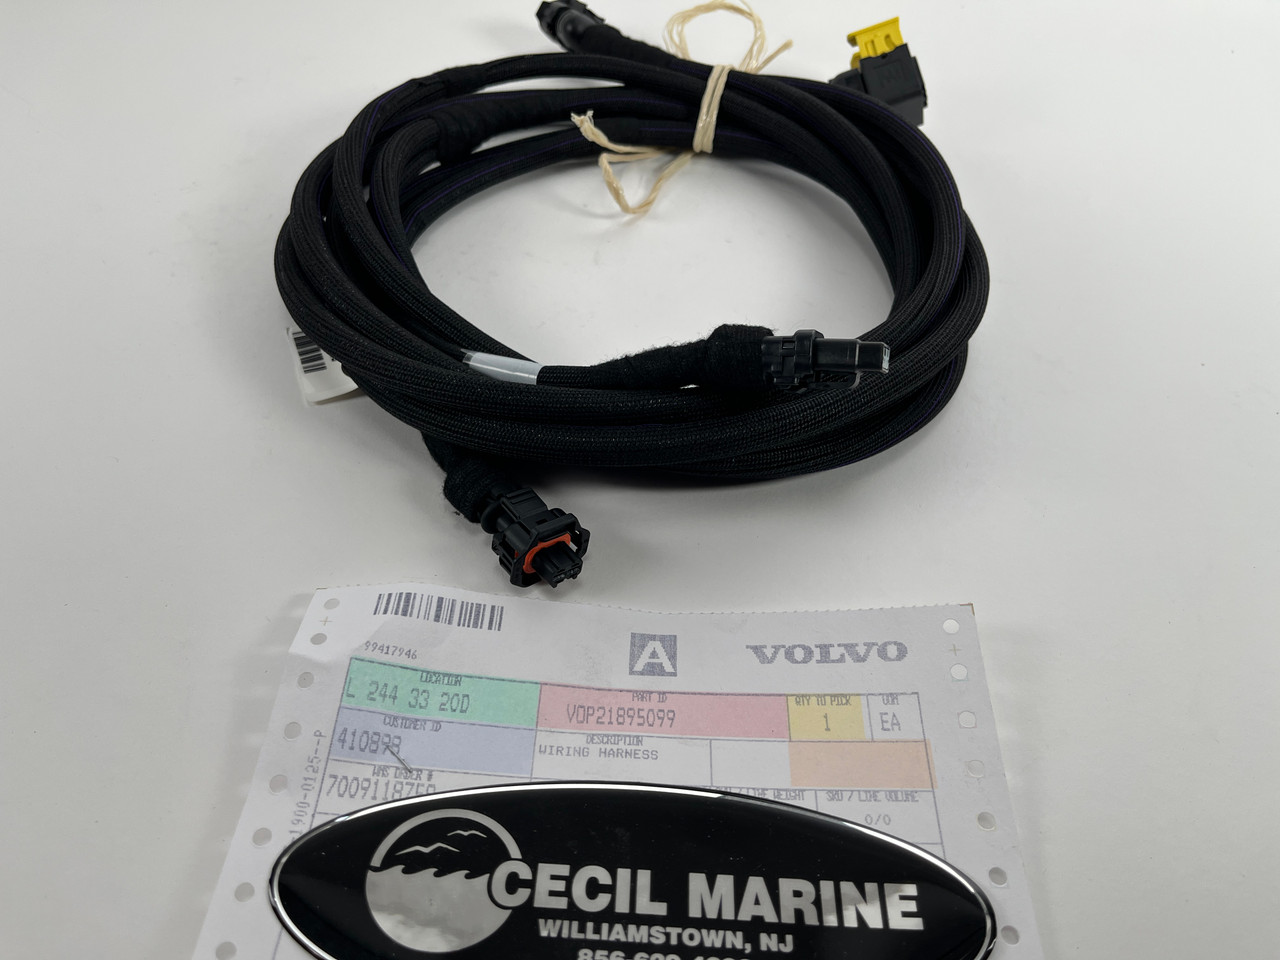 $299.99* GENUINE VOLVO no tax* WIRING HARNESS 21895099 *In Stock And Ready To Ship!